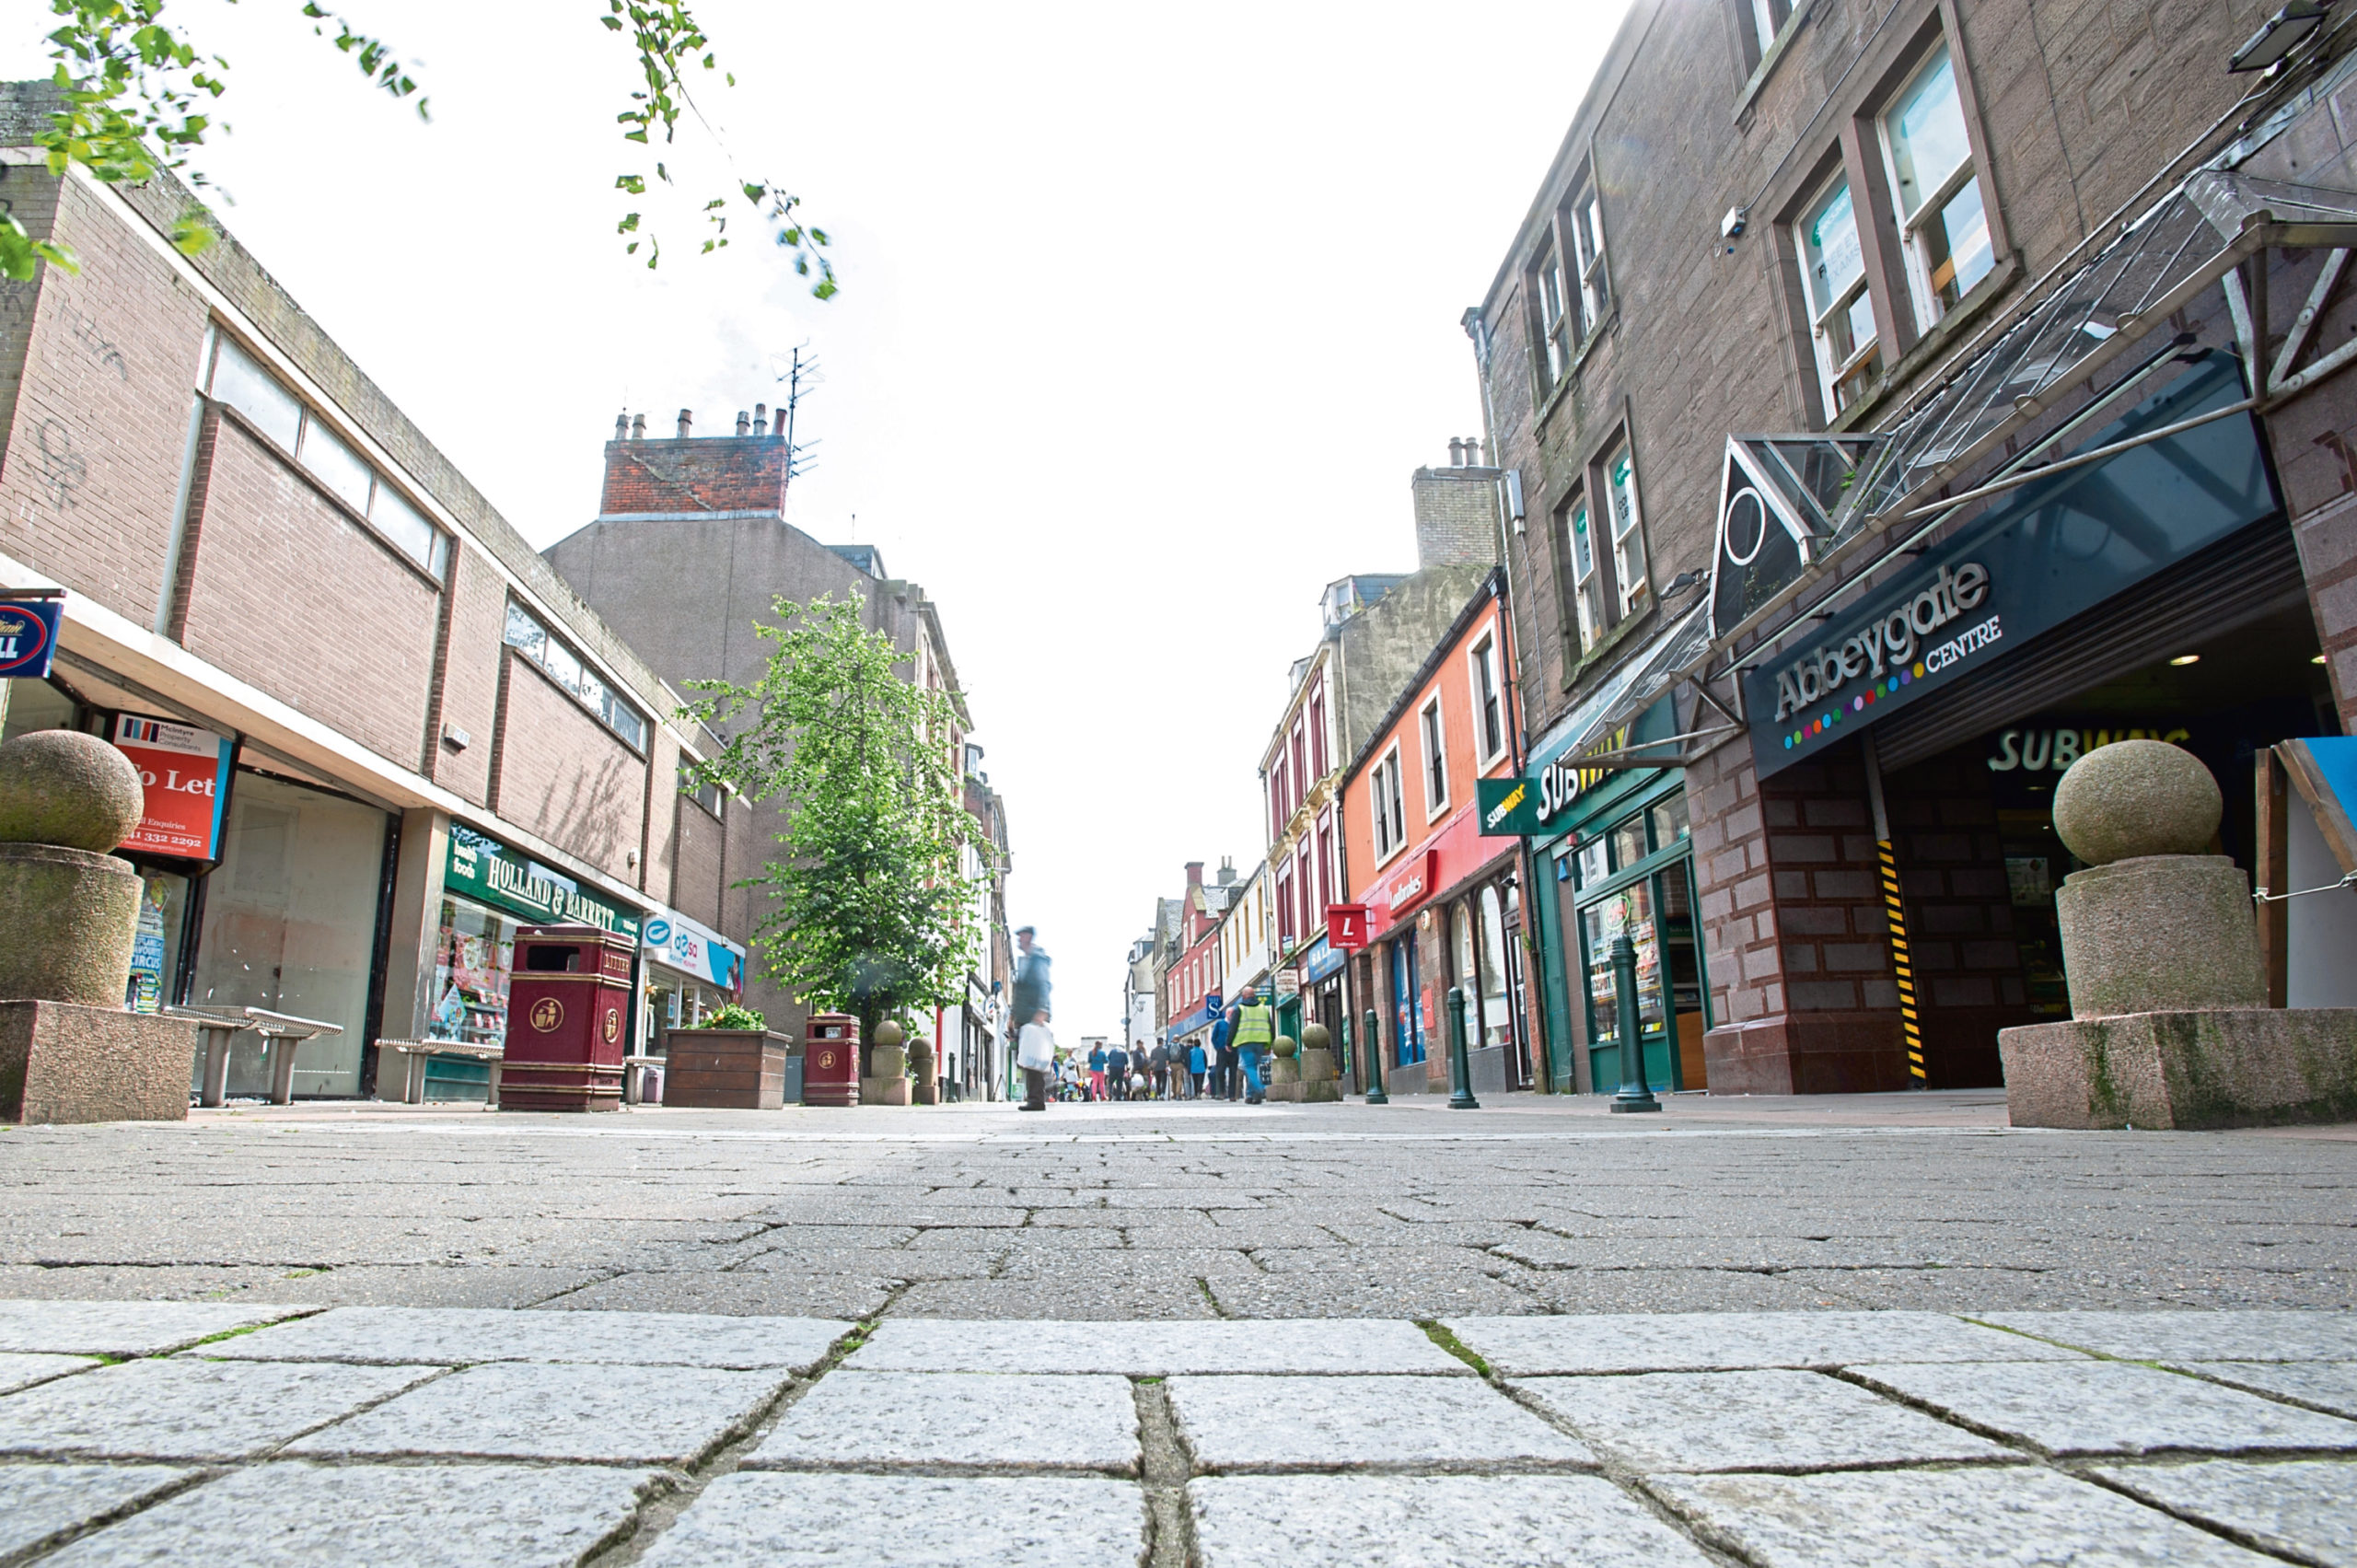 Arbroath High Street. The Covid-19 restrictions saw shops pull down the shutters.